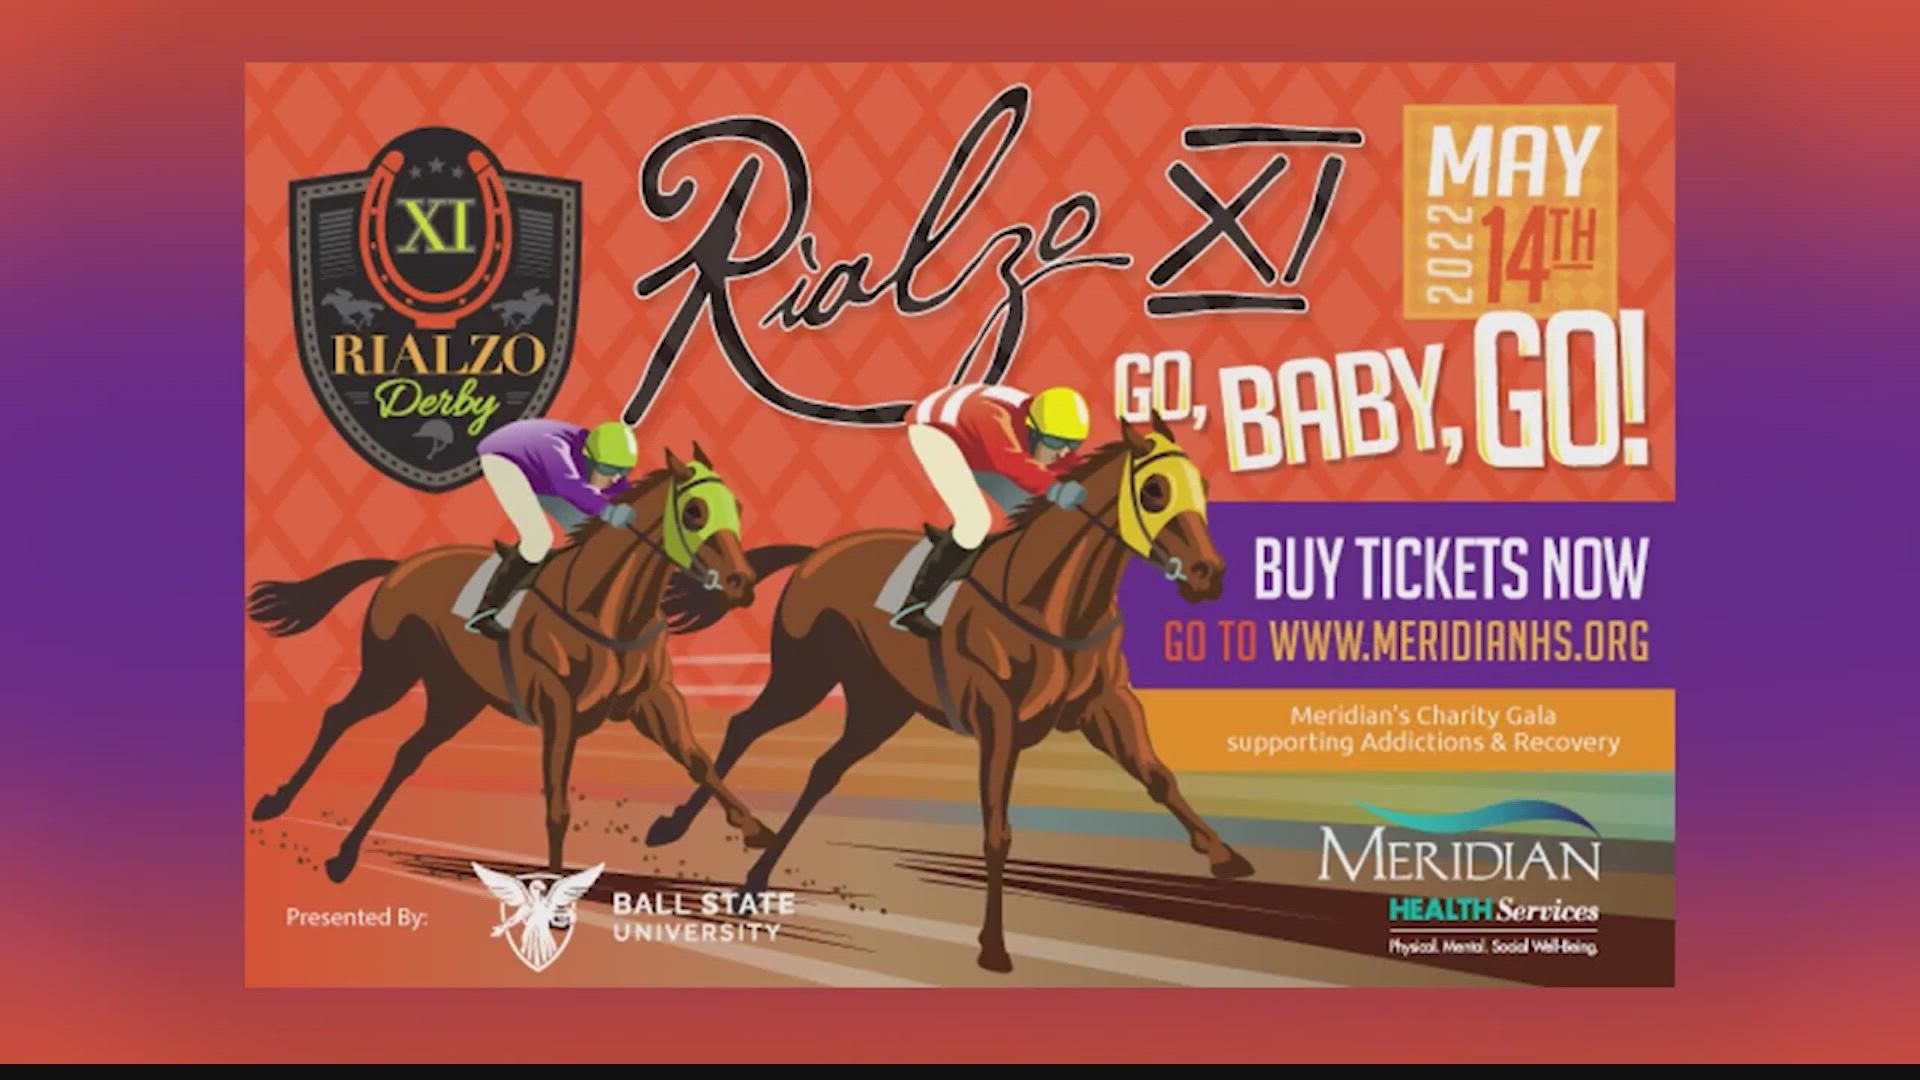 Meridian Health Services and Ball State University are partnering to plan Rialzo, a Kentucky Derby themed event benefitting Meridian's Addictions & Recovery Programs